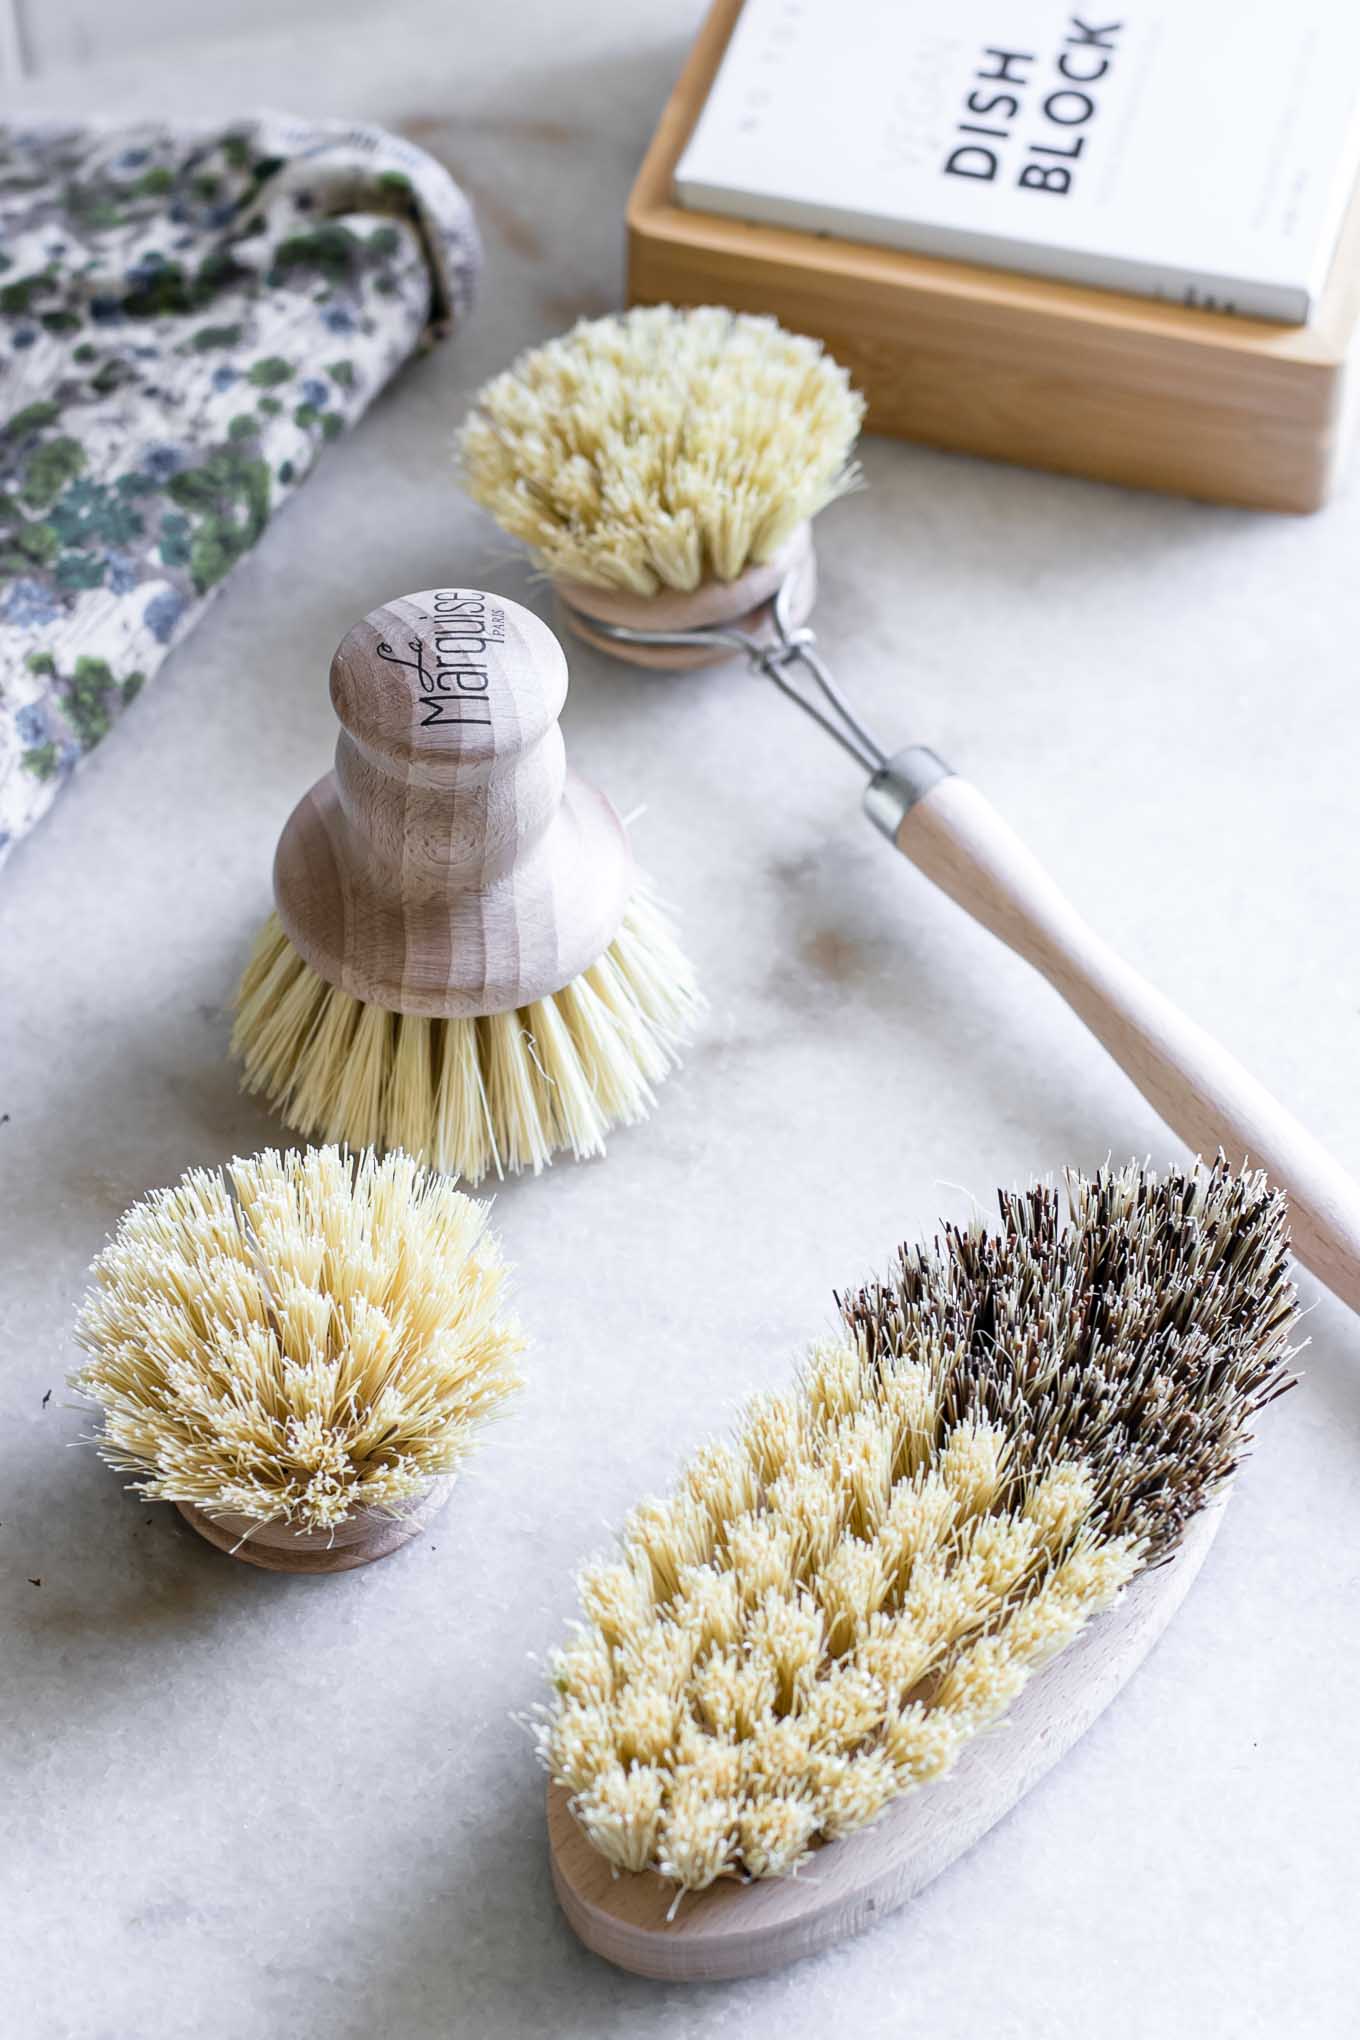 four wooden kitchen dish brushes on a white countertop